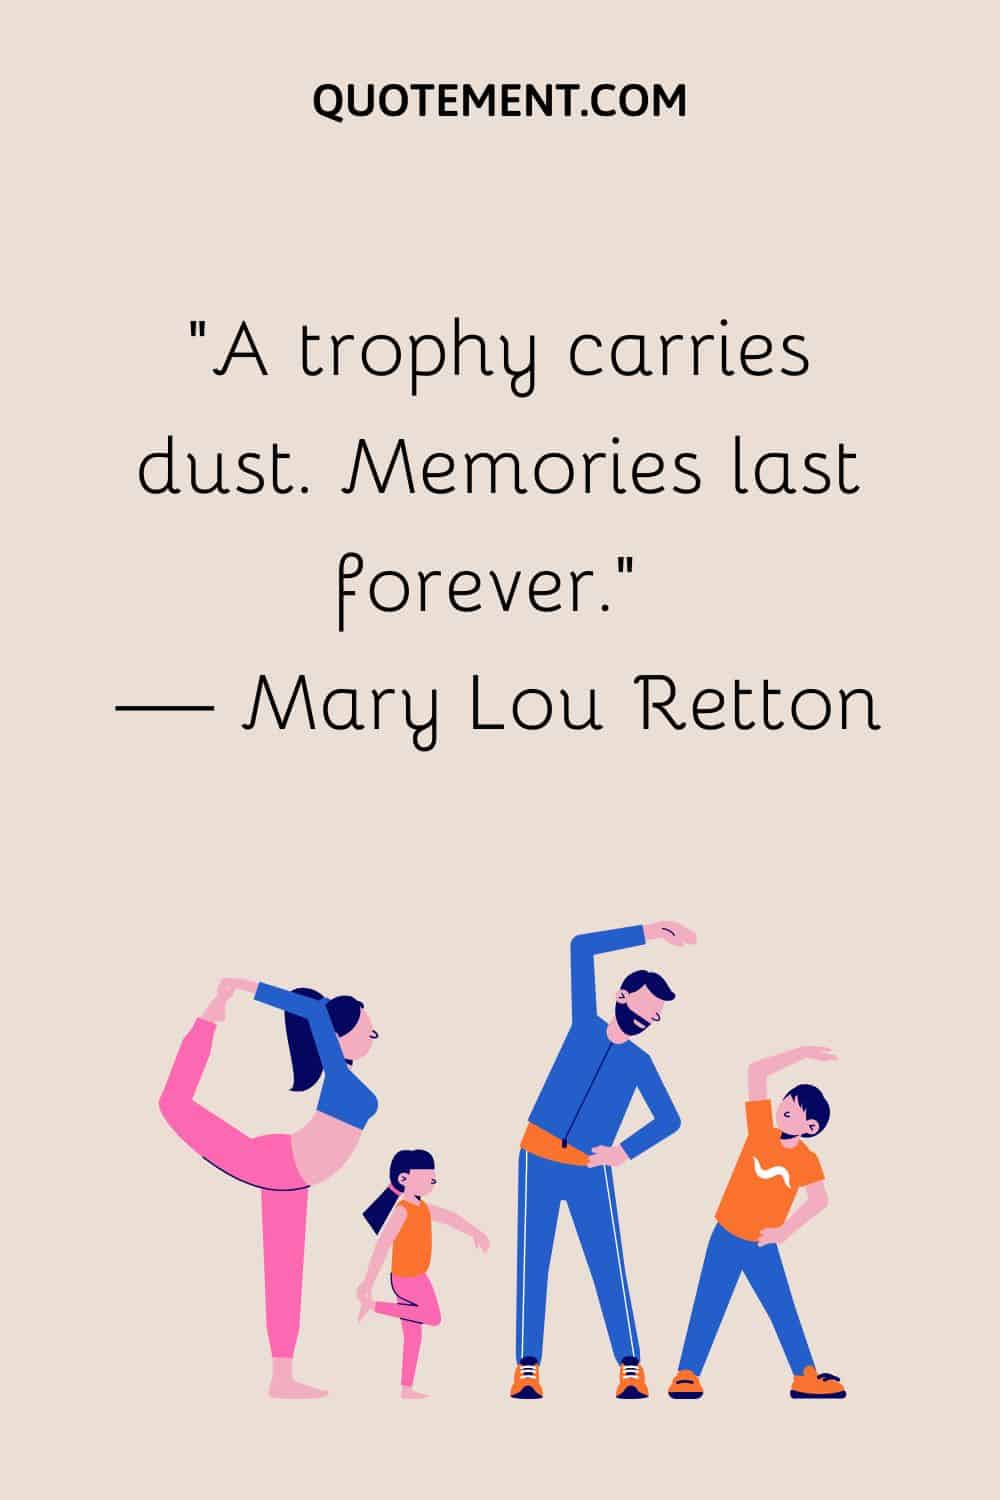 A trophy carries dust. Memories last forever